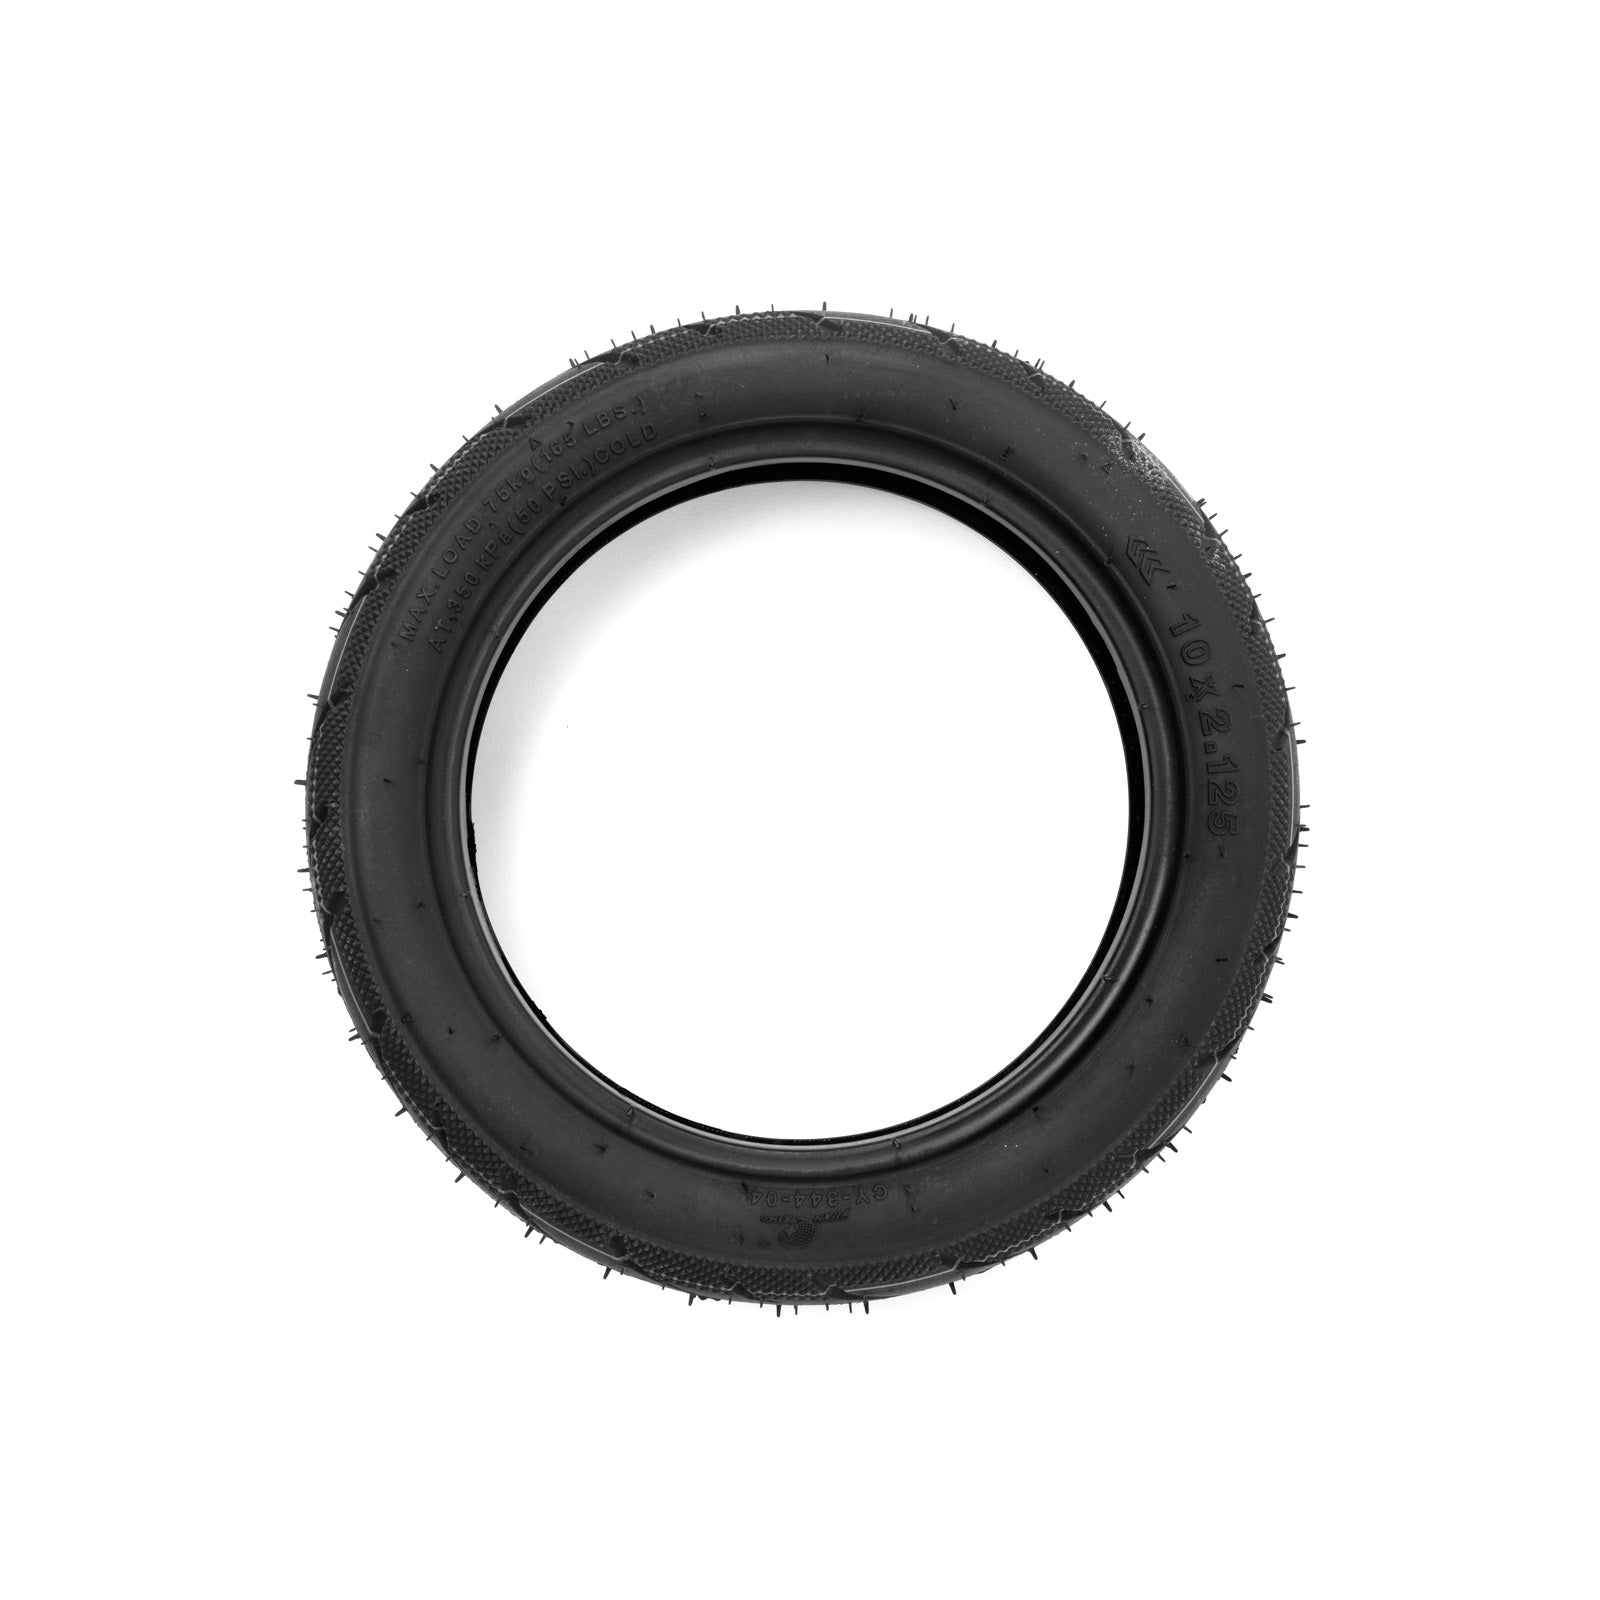 High grade 10 inch 10x2 756 5 Scooter Tire 10x2 706 5 Tubeless